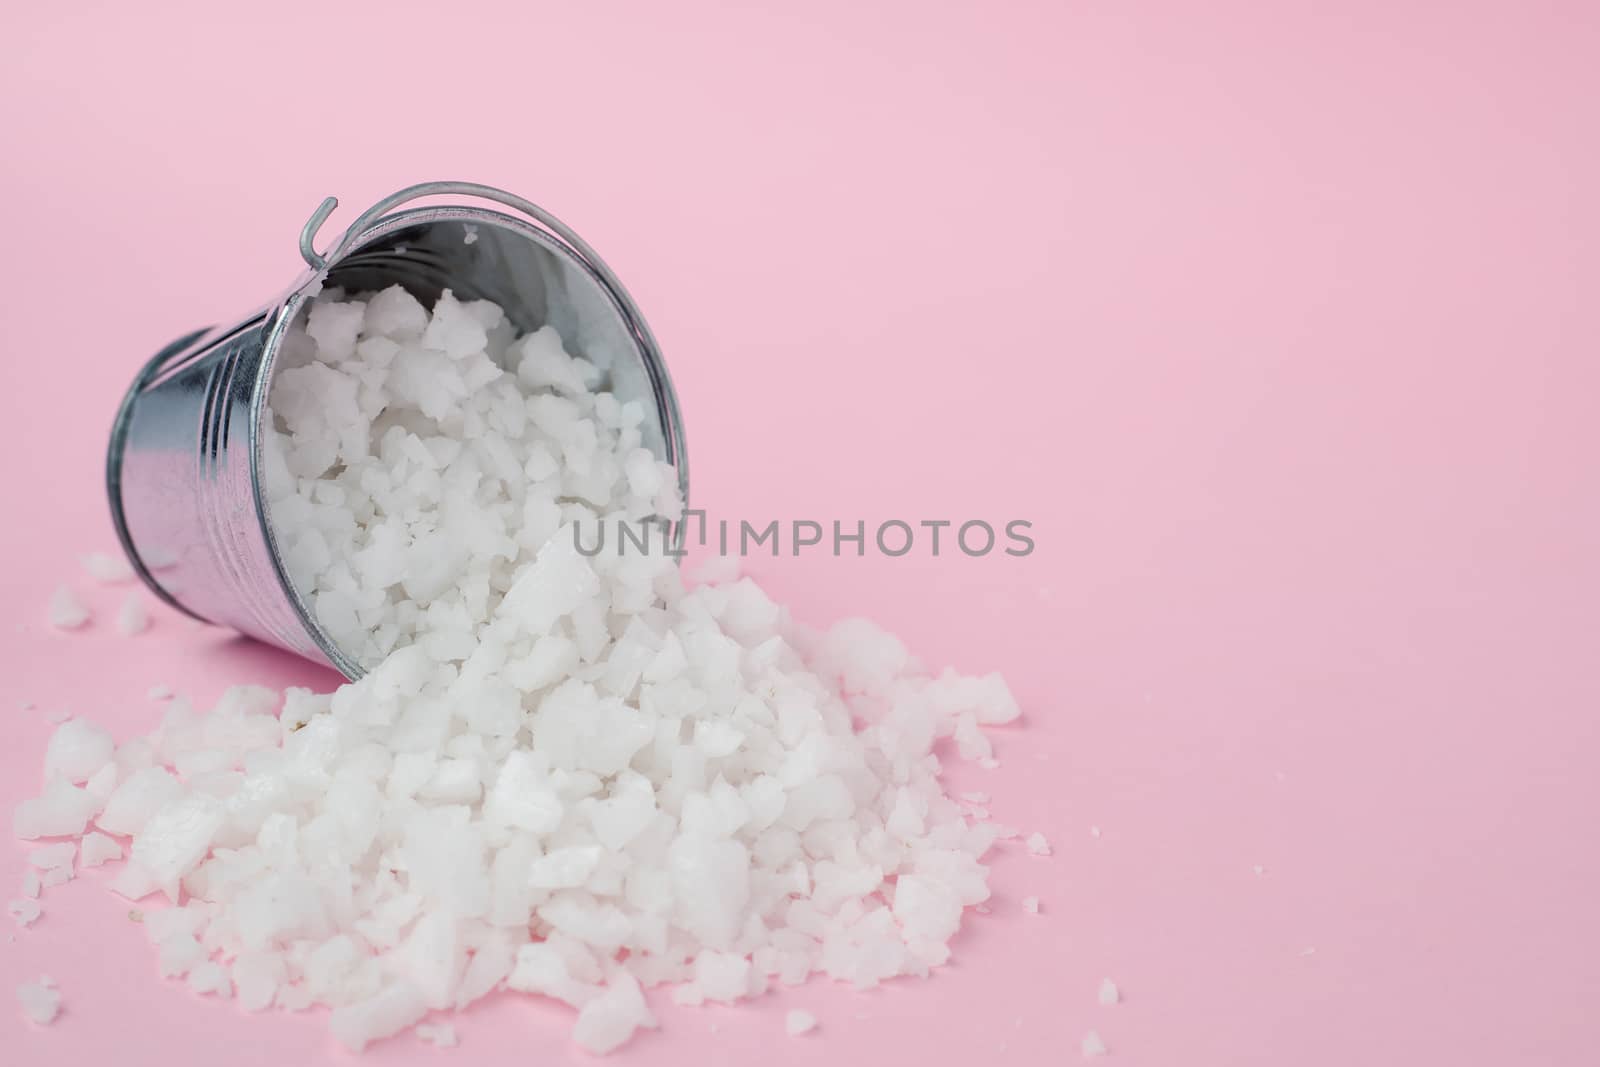 Sea salt in a tin bucket on pink background for seasoning or preserving food